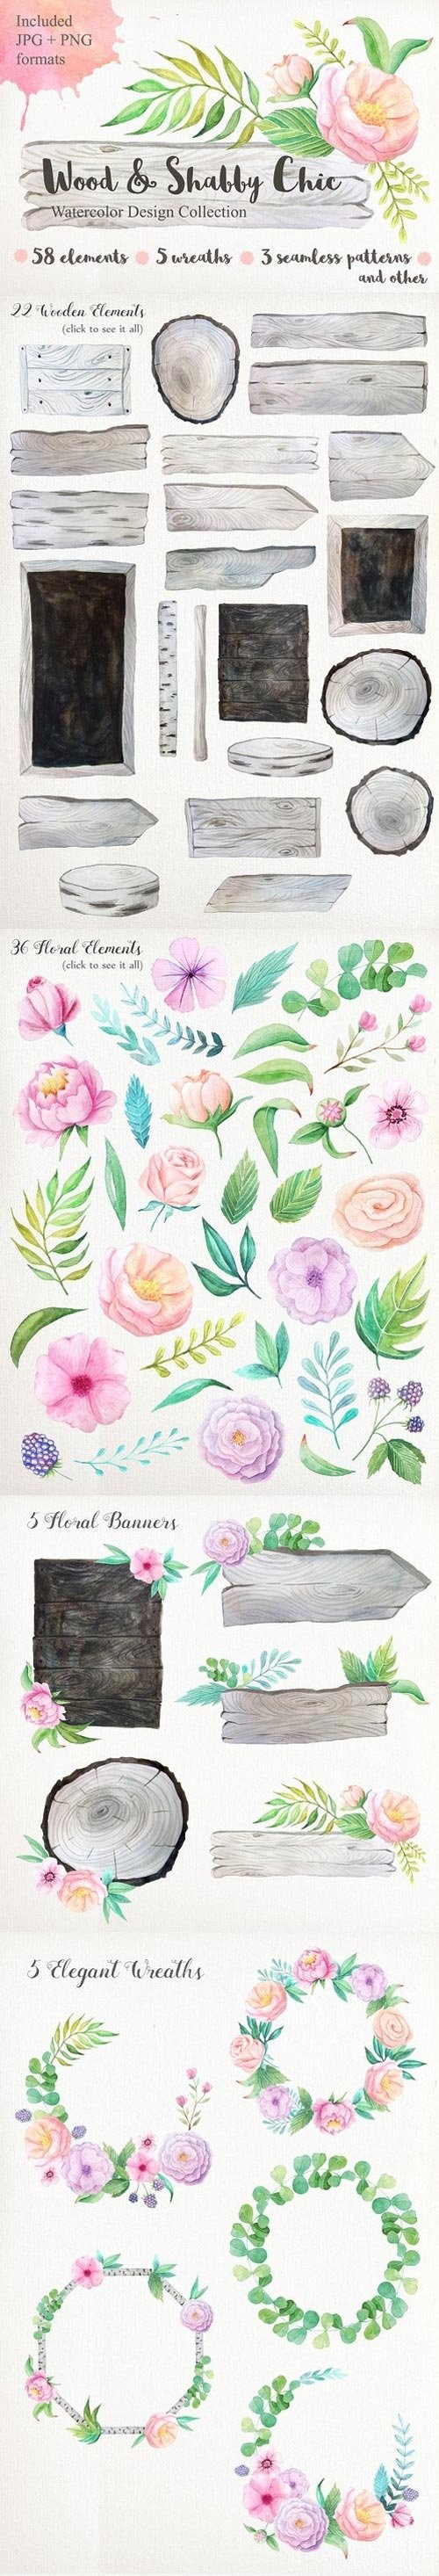 Shabby Chic Watercolor Pack 642123